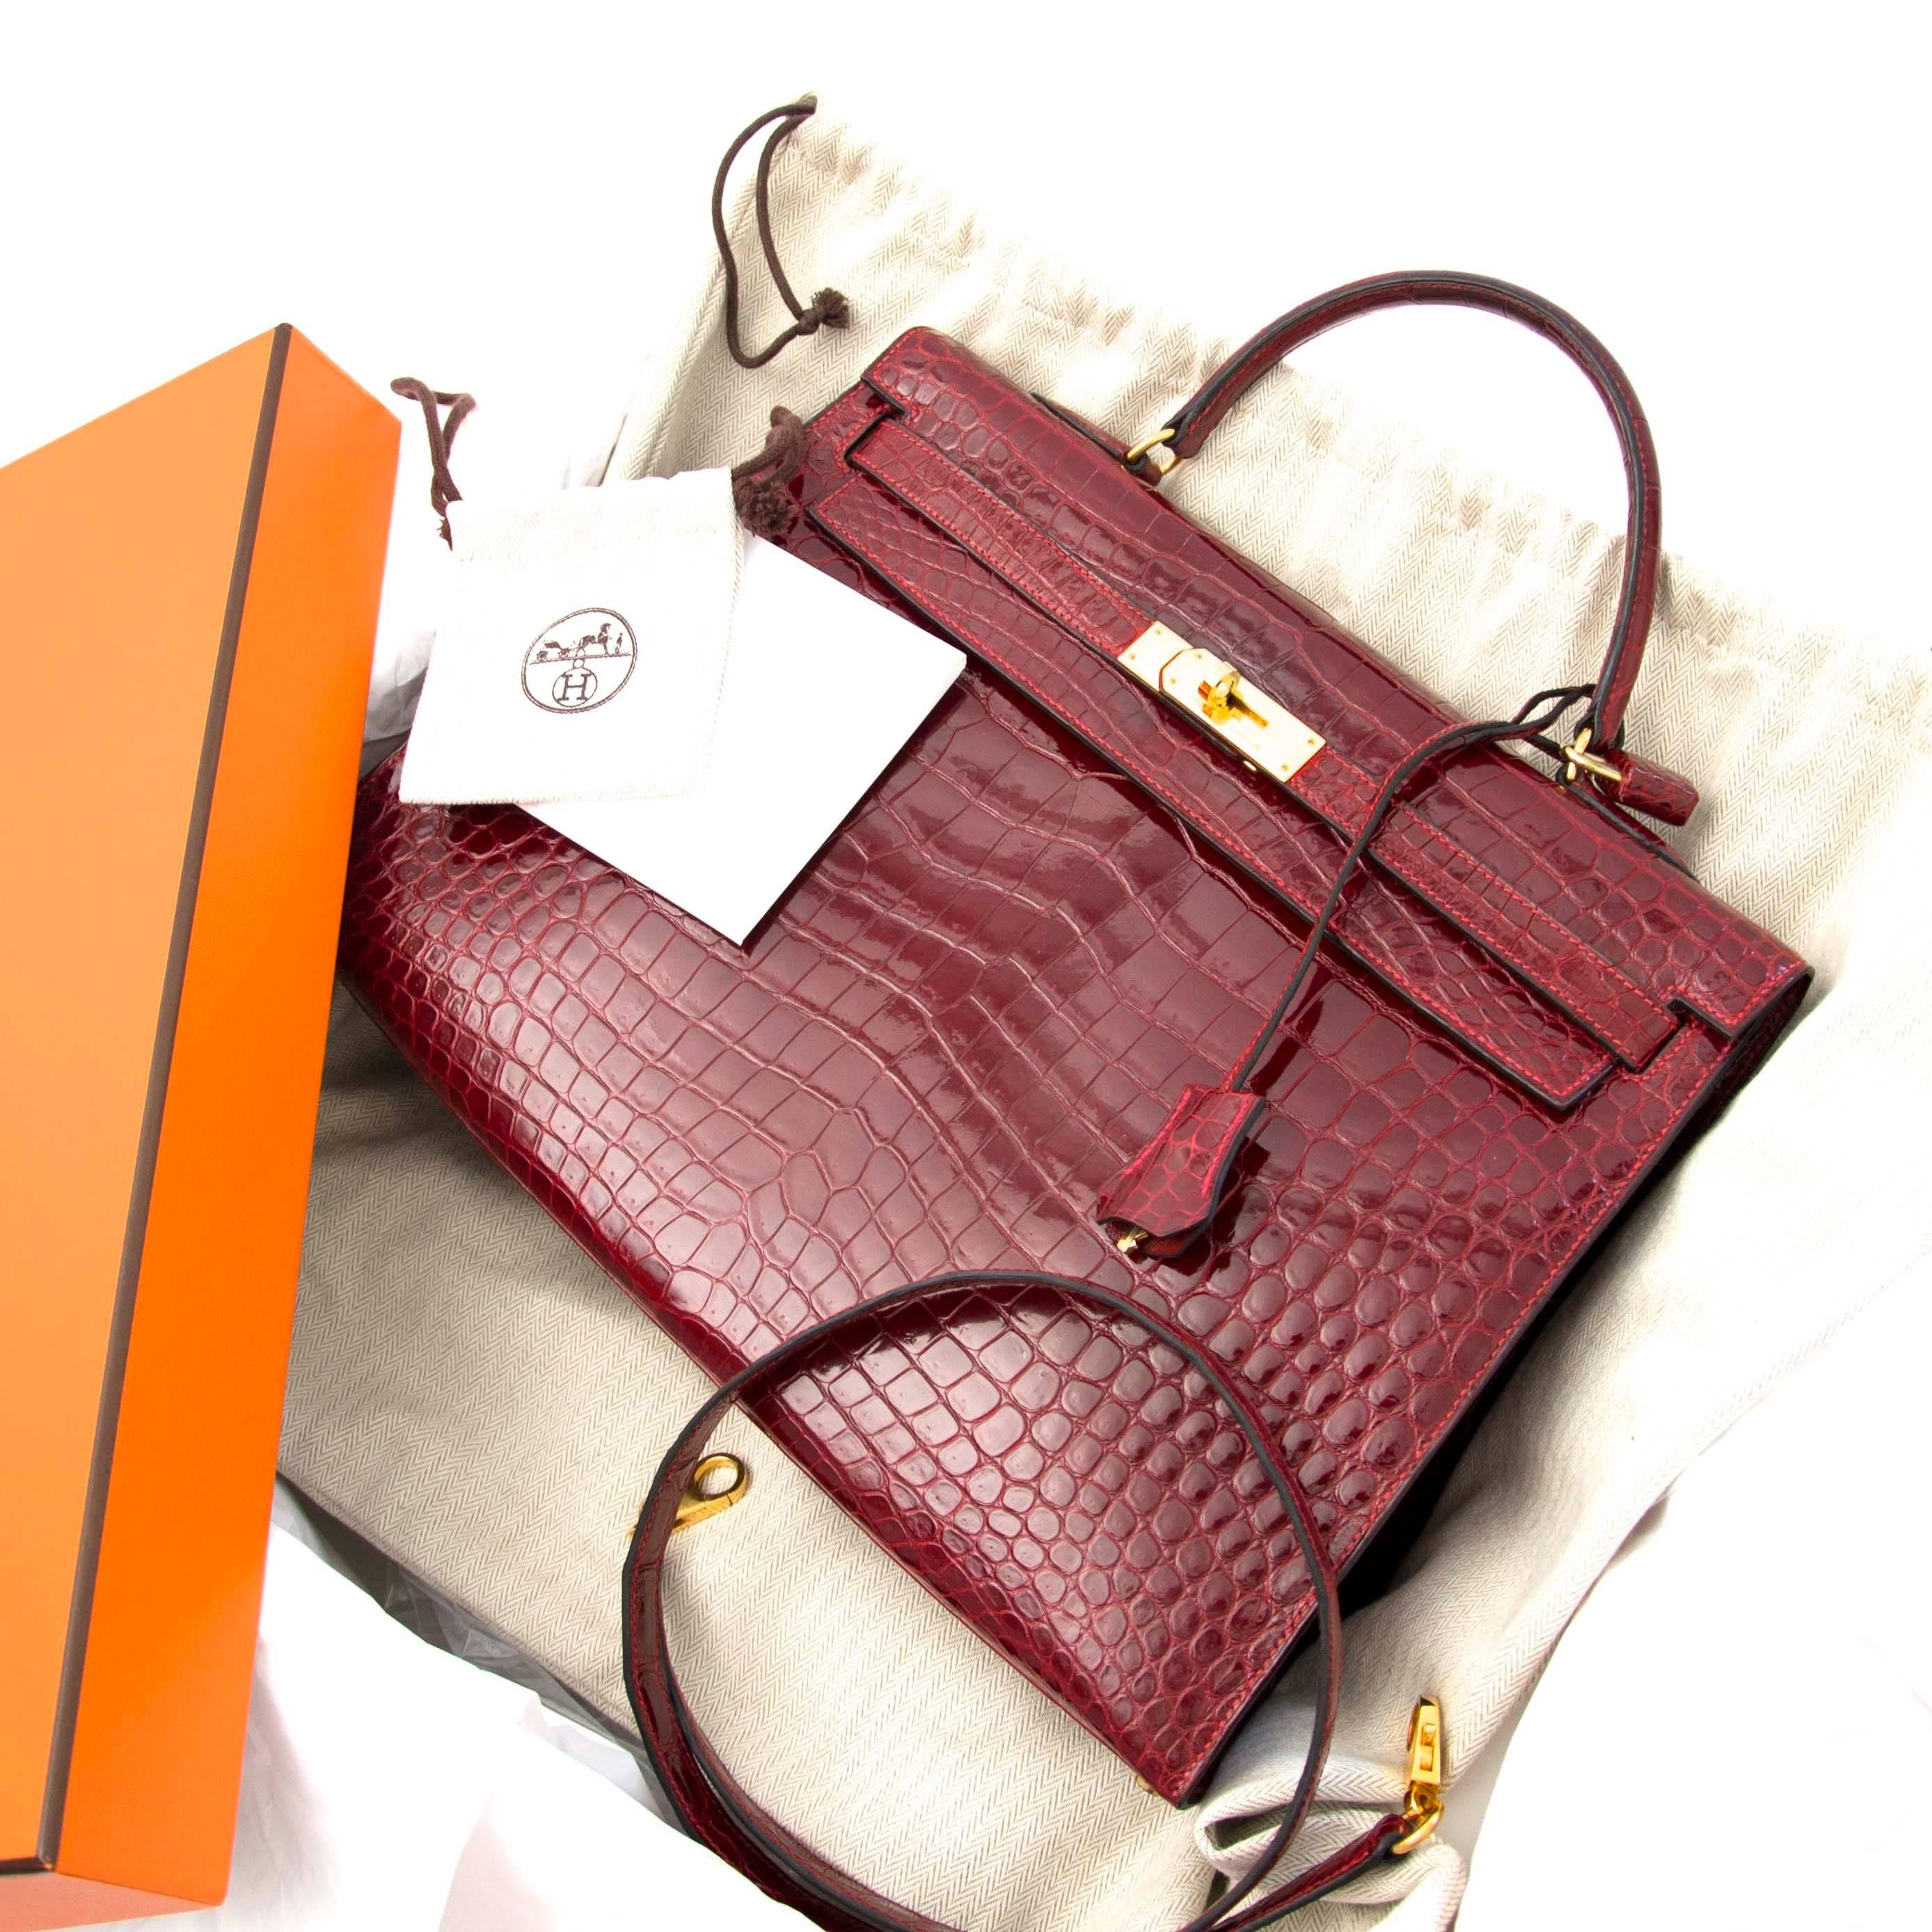 Excellent Preloved Condition

Rare Hermes Kelly 35 Rouge H Alligator GHW

The talk about town this Hermes Limited Edition Kelly 35 in Shiny red toned 